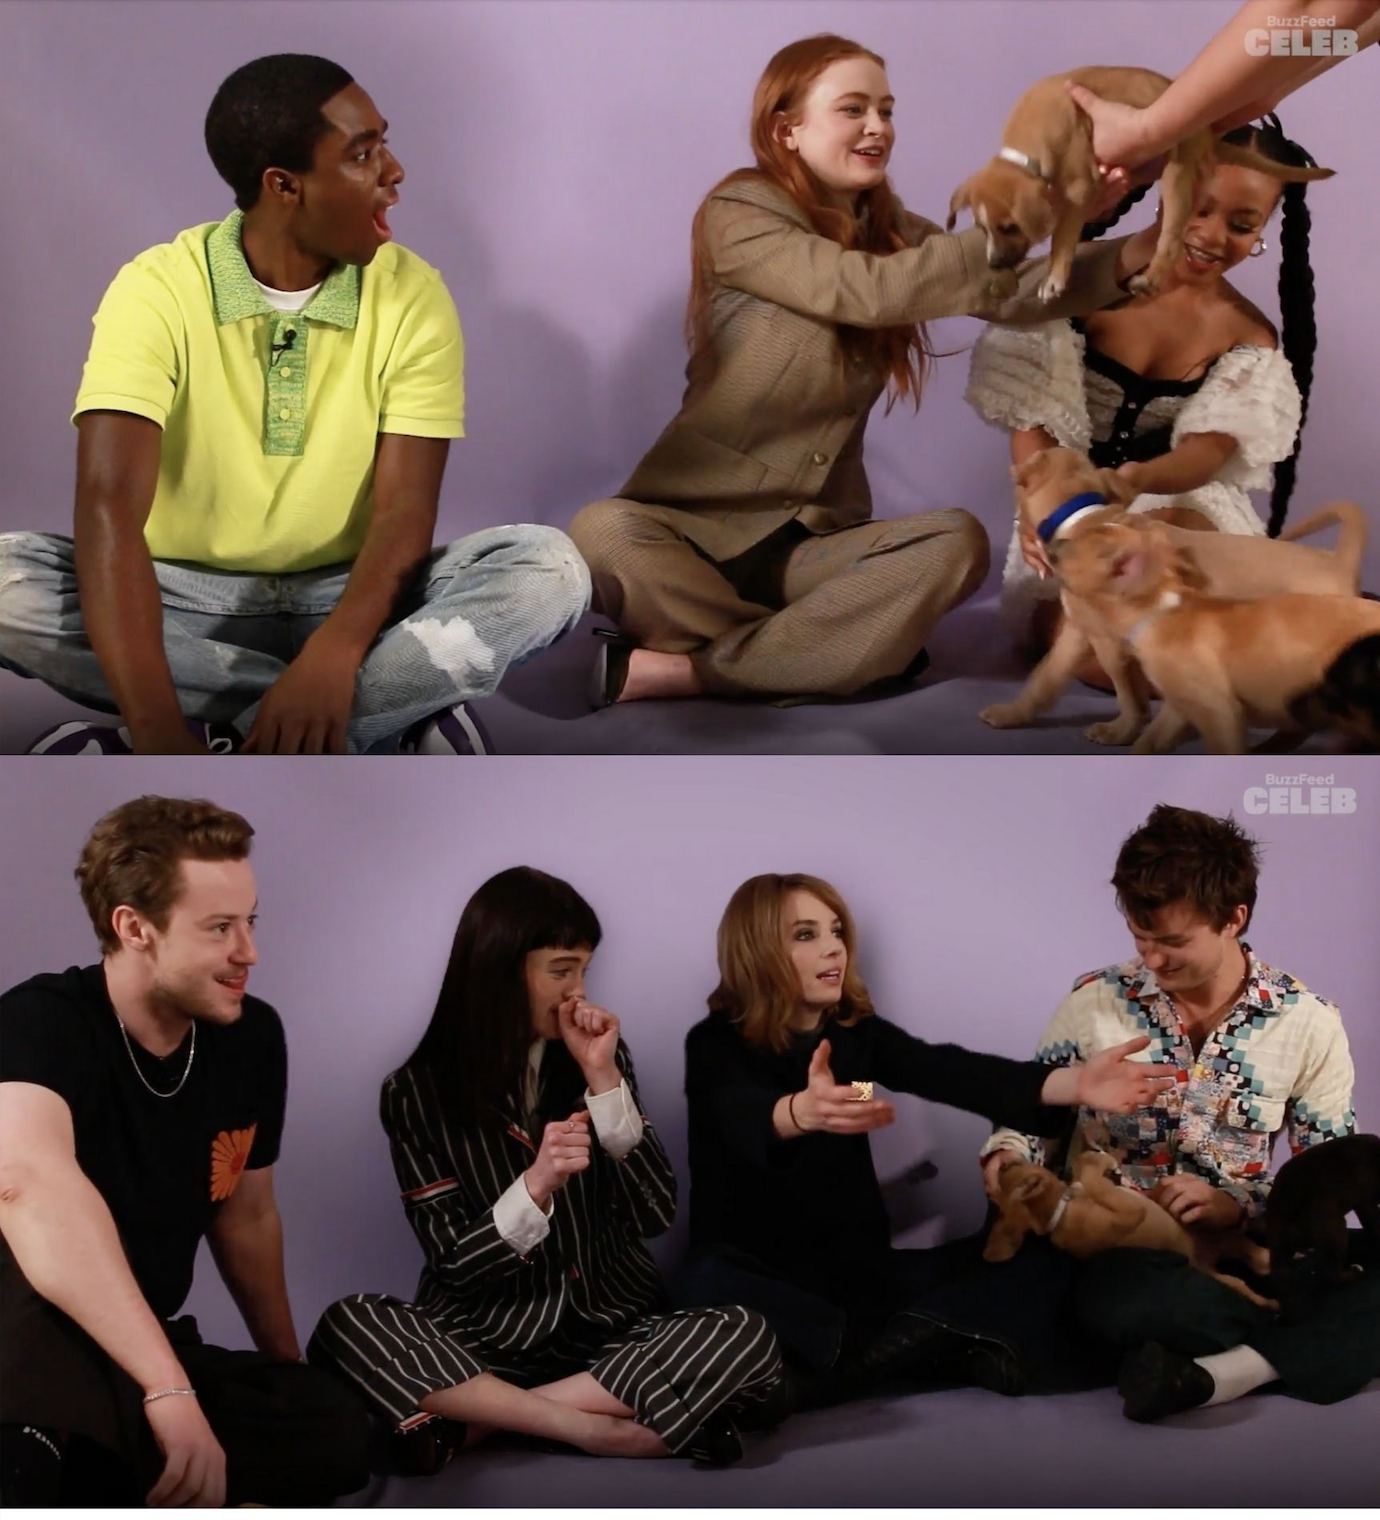 All the members of the cast reacting with happiness to new puppies being brought out